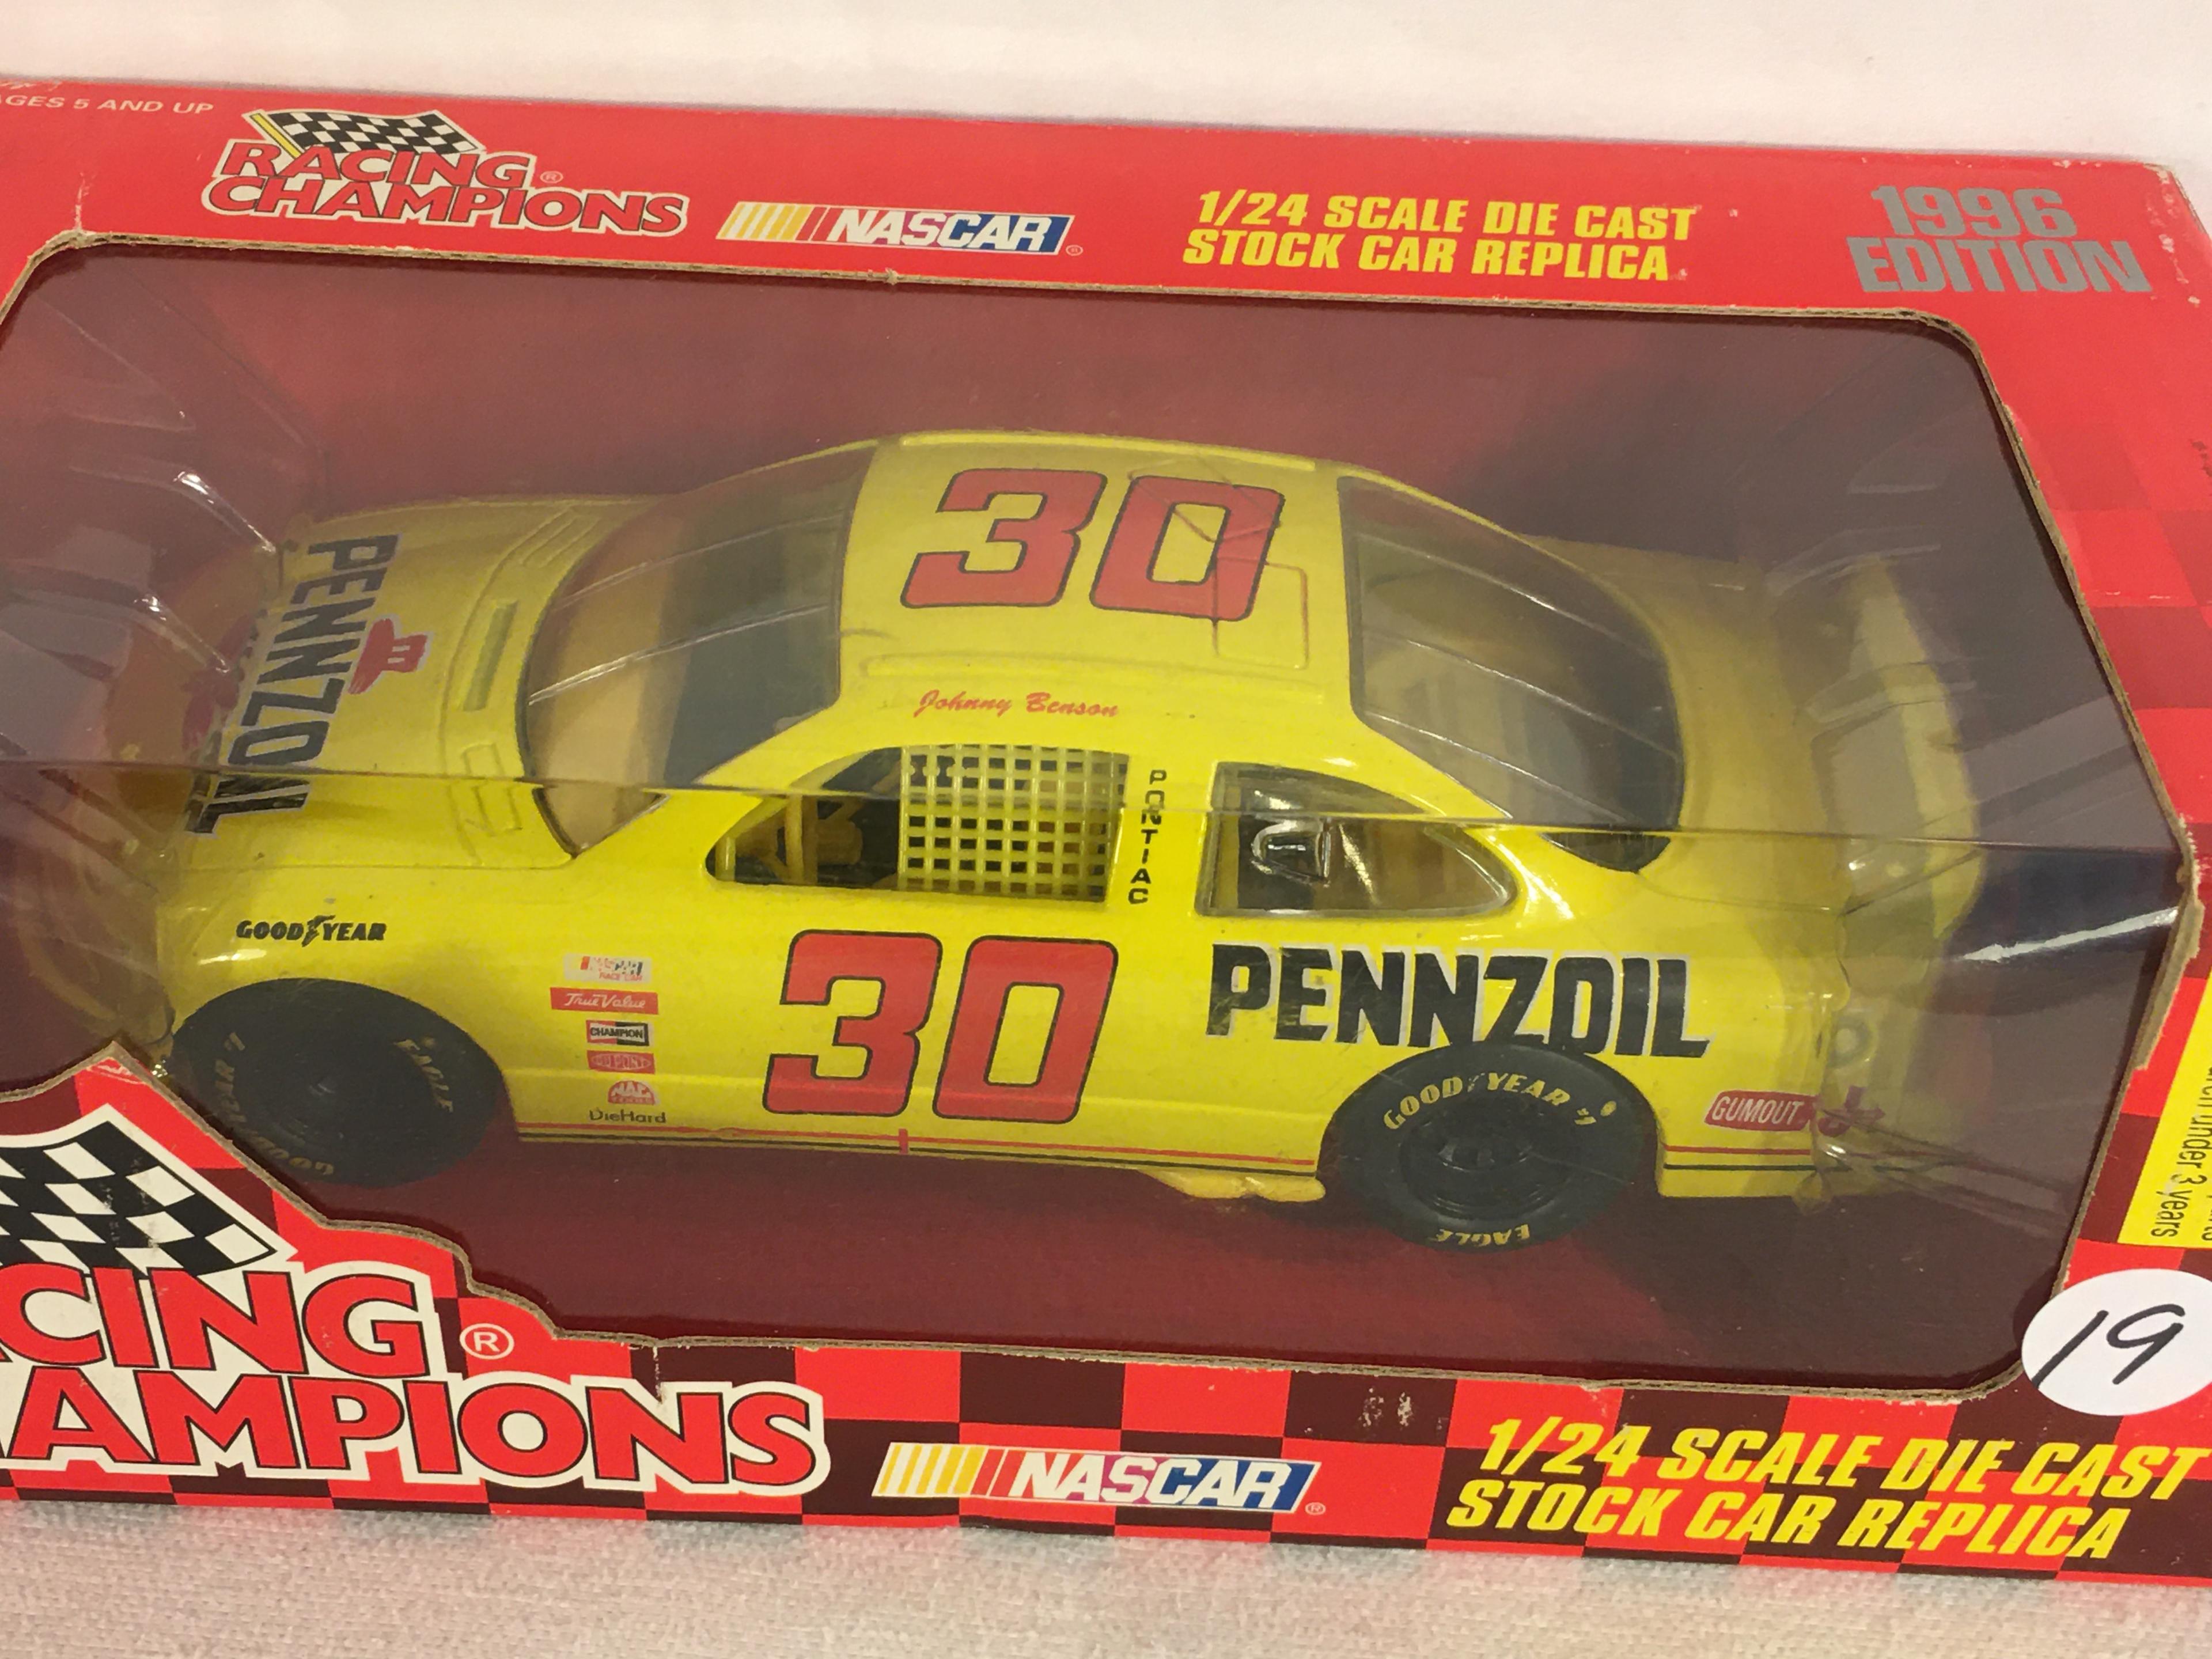 Collector Racing Champions Nascar 1/24 Scale DieCast Stock Car Replica 1996 Edition